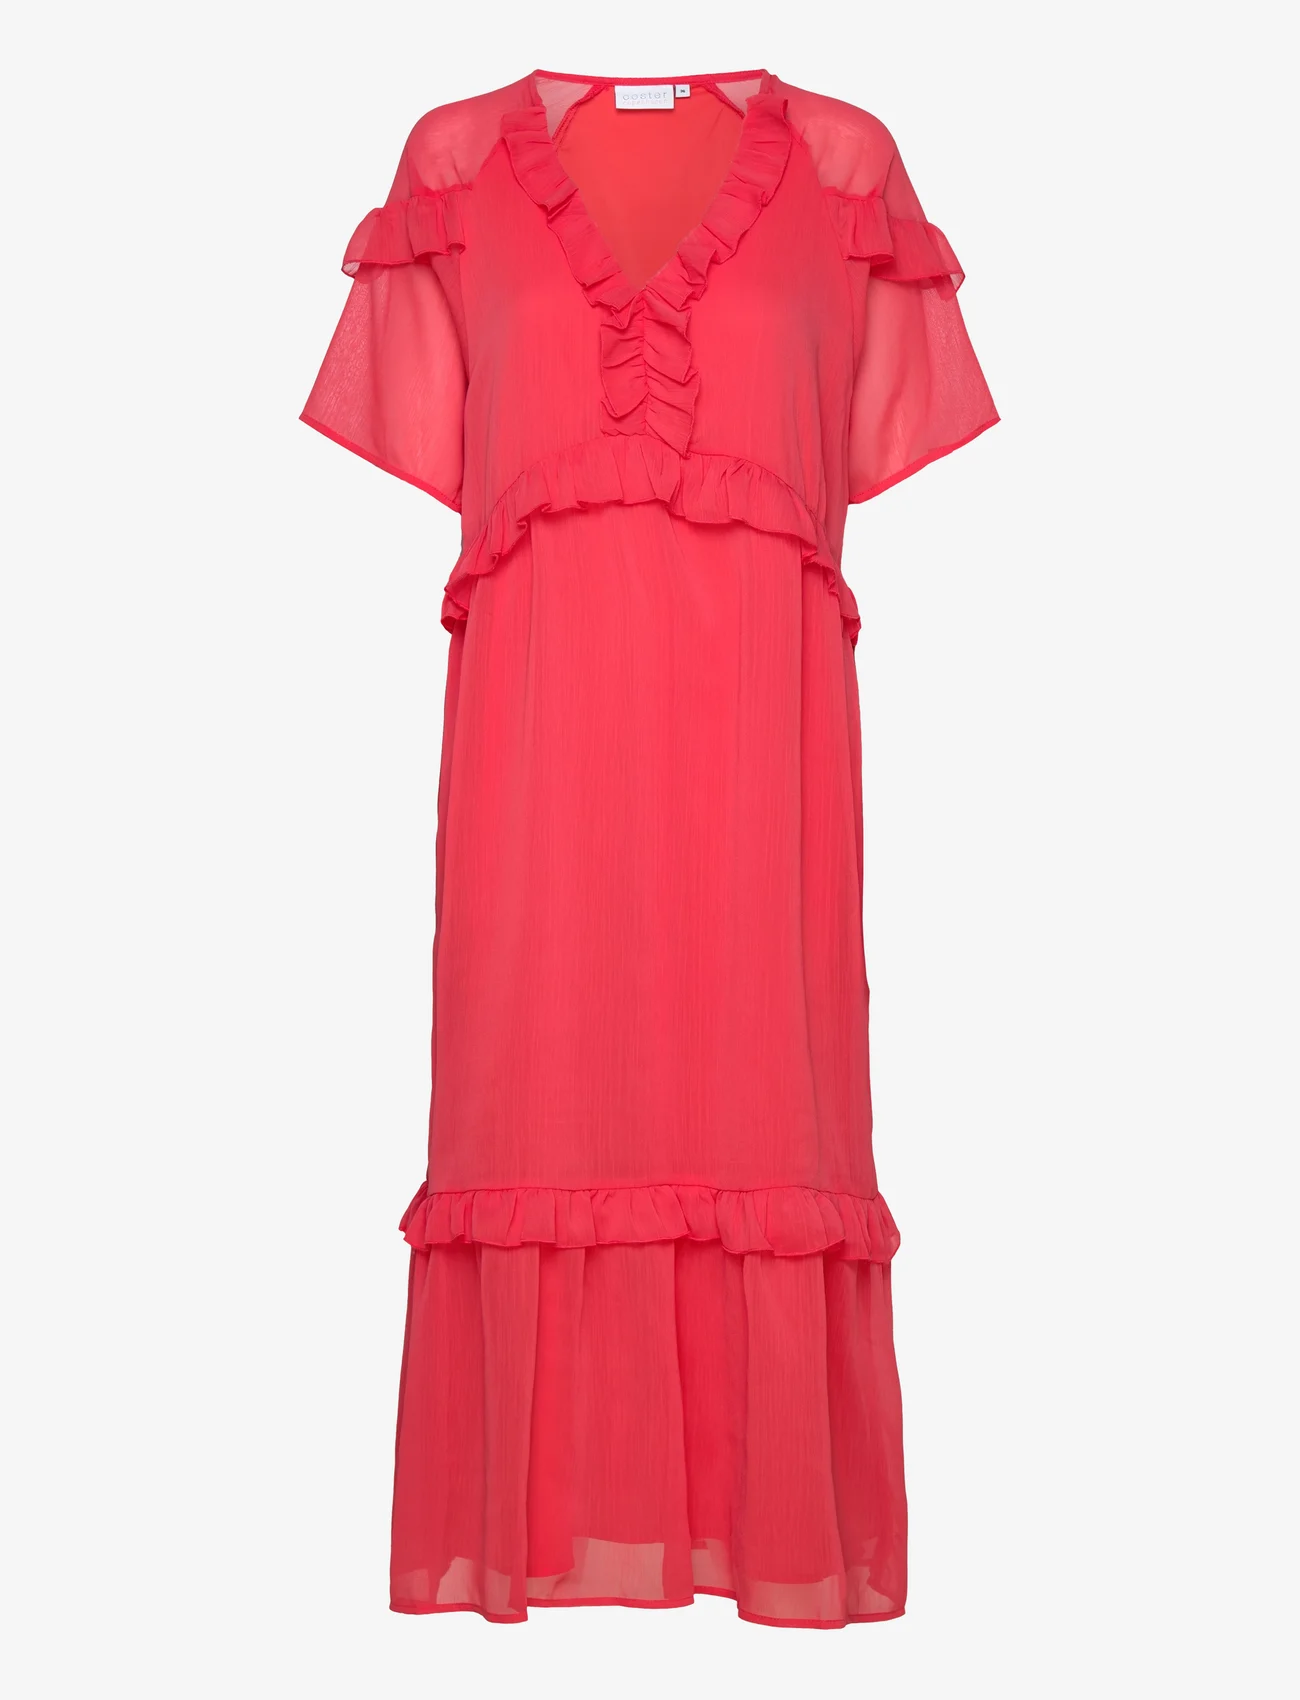 Coster Copenhagen - Long dress with frills - peoriided outlet-hindadega - coral pink - 0